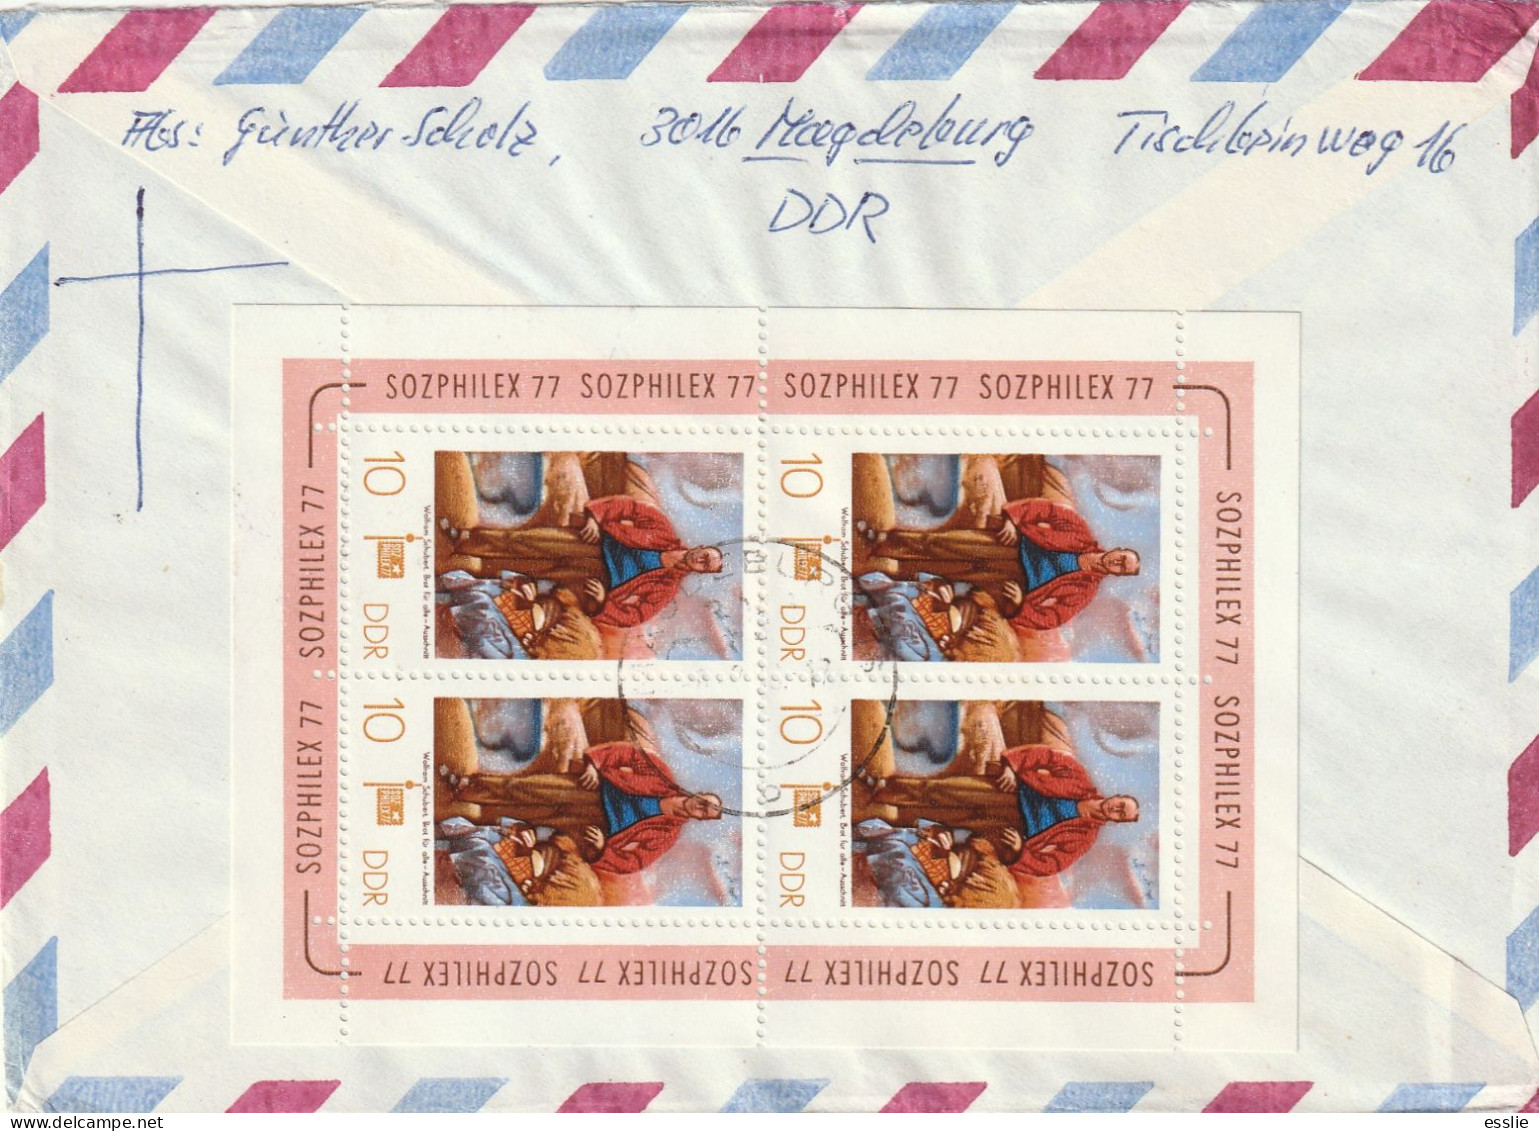 Germany DDR Cover Einschreiben Registered - 1977 1978 - Firemen Activities Fire Brigade Education Of The Deaf SOZPHILEX - Covers & Documents